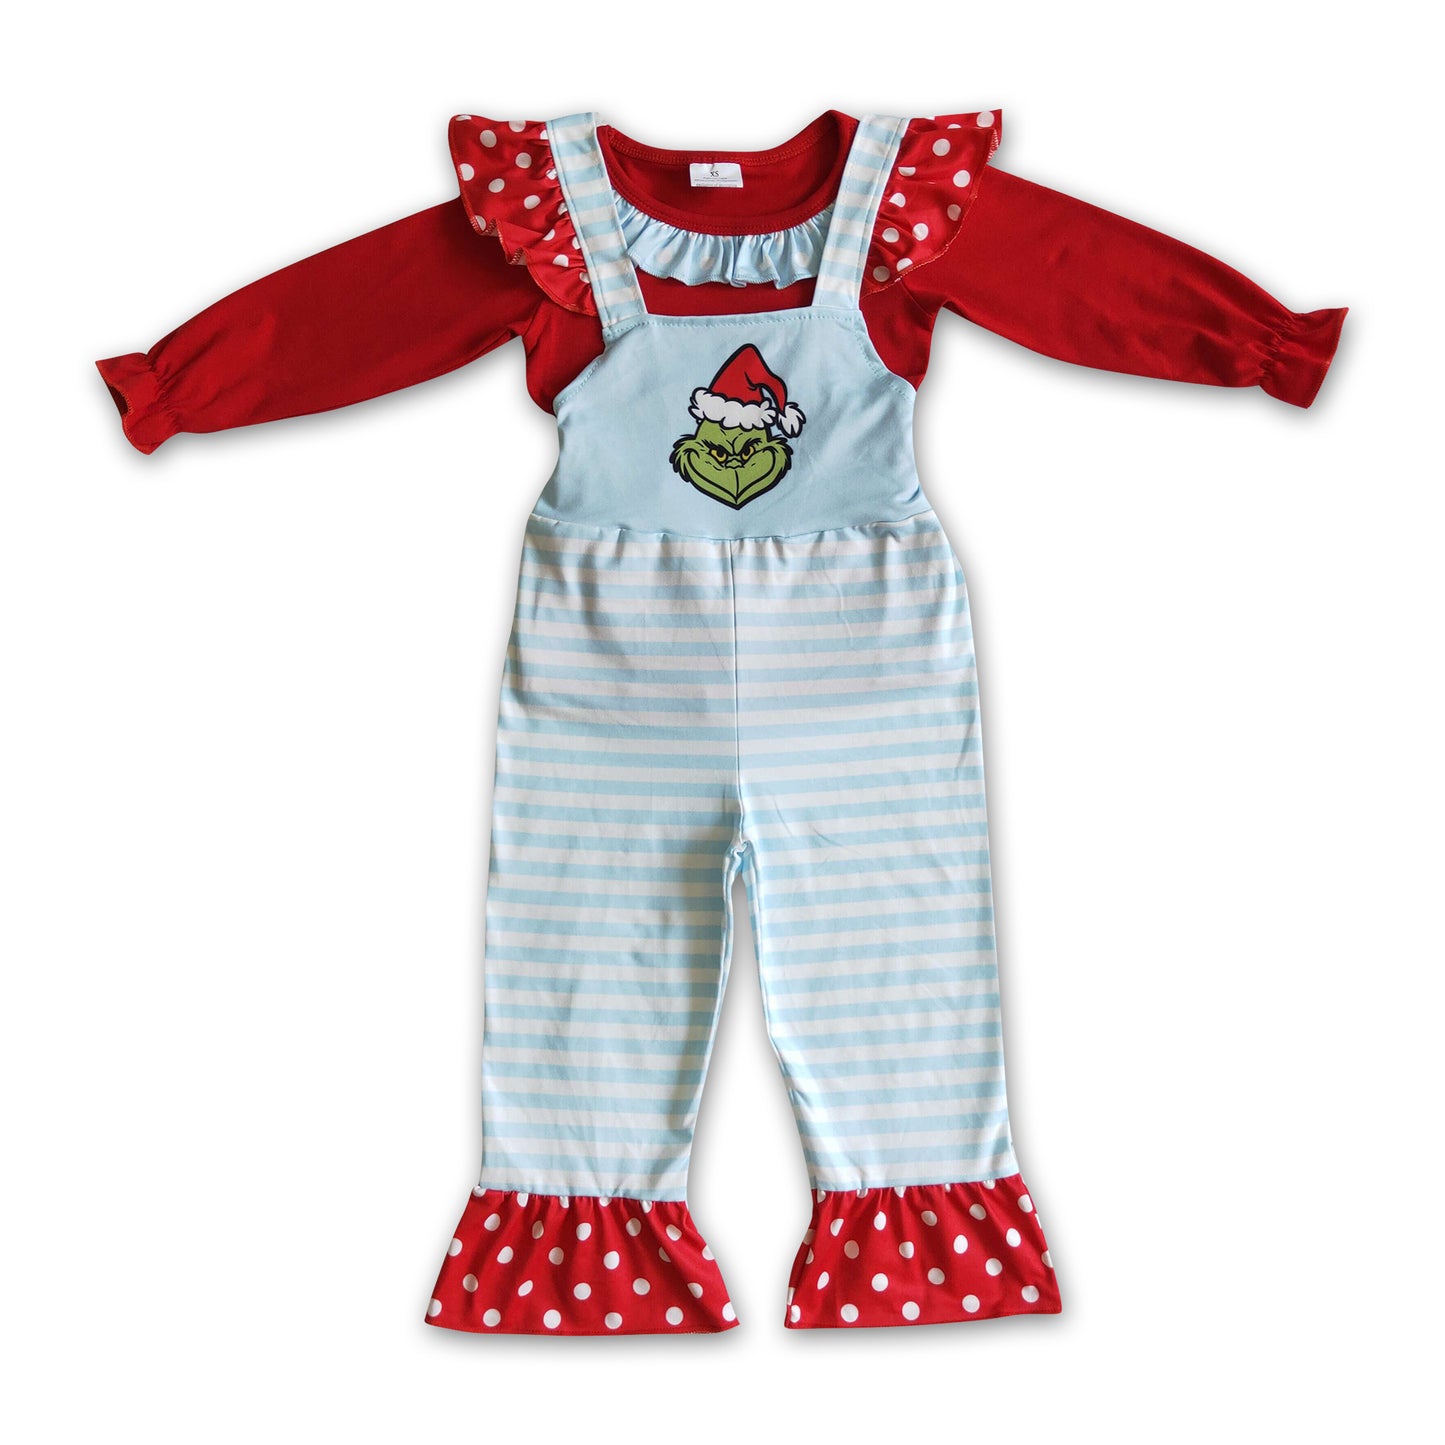 Red cotton top green face stripe overalls kids Christmas set